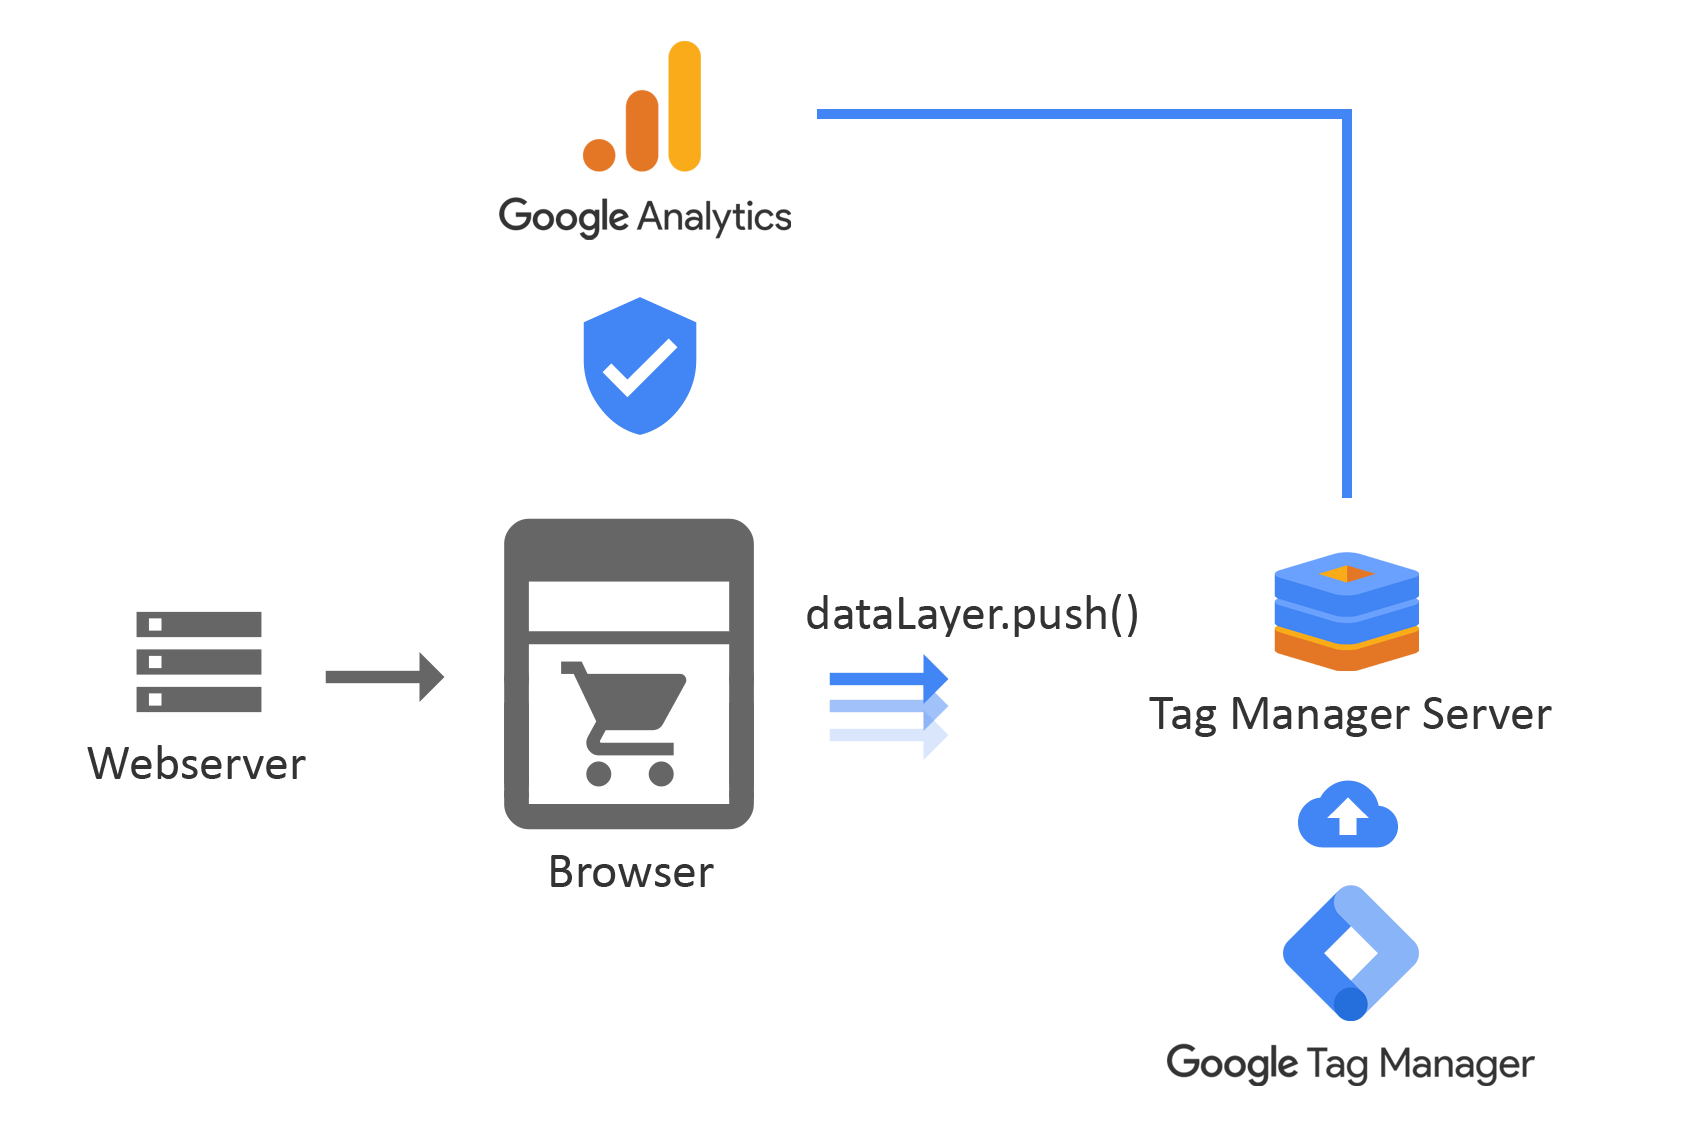 Google Analytics Tracking with the Tag Manager Server